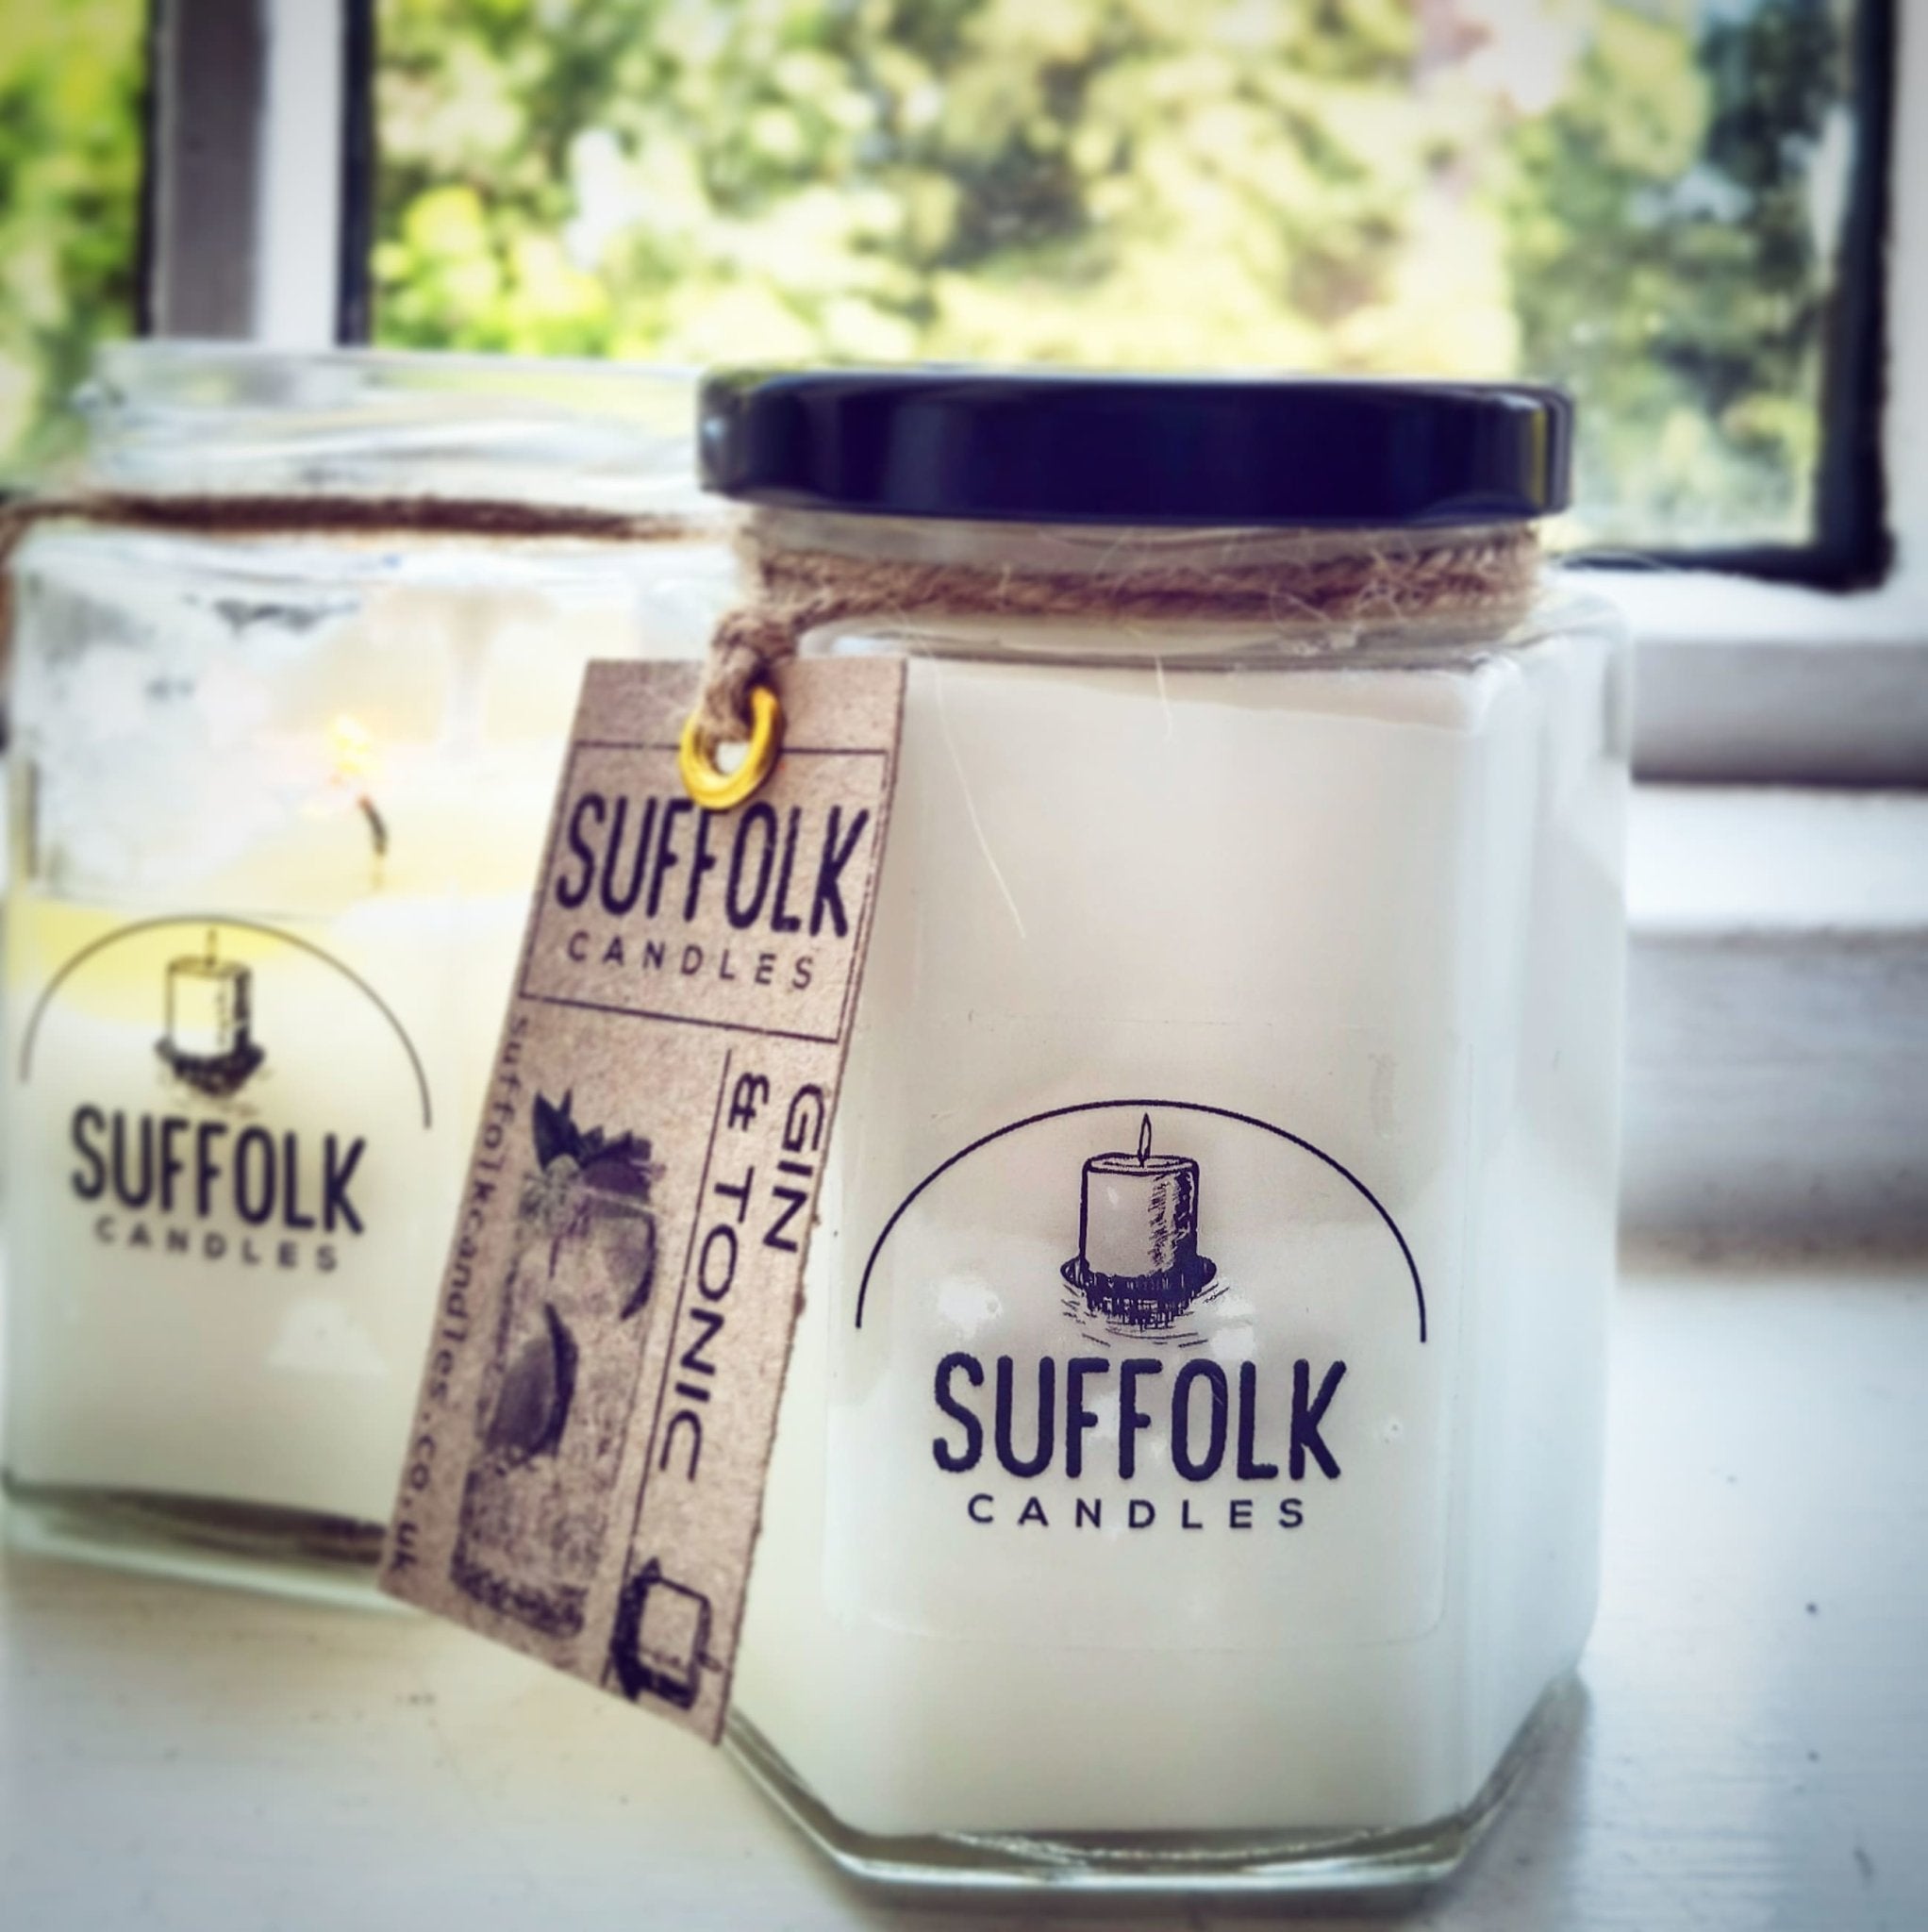 How to look after your rapeseed & coconut wax candle - Suffolk Candles